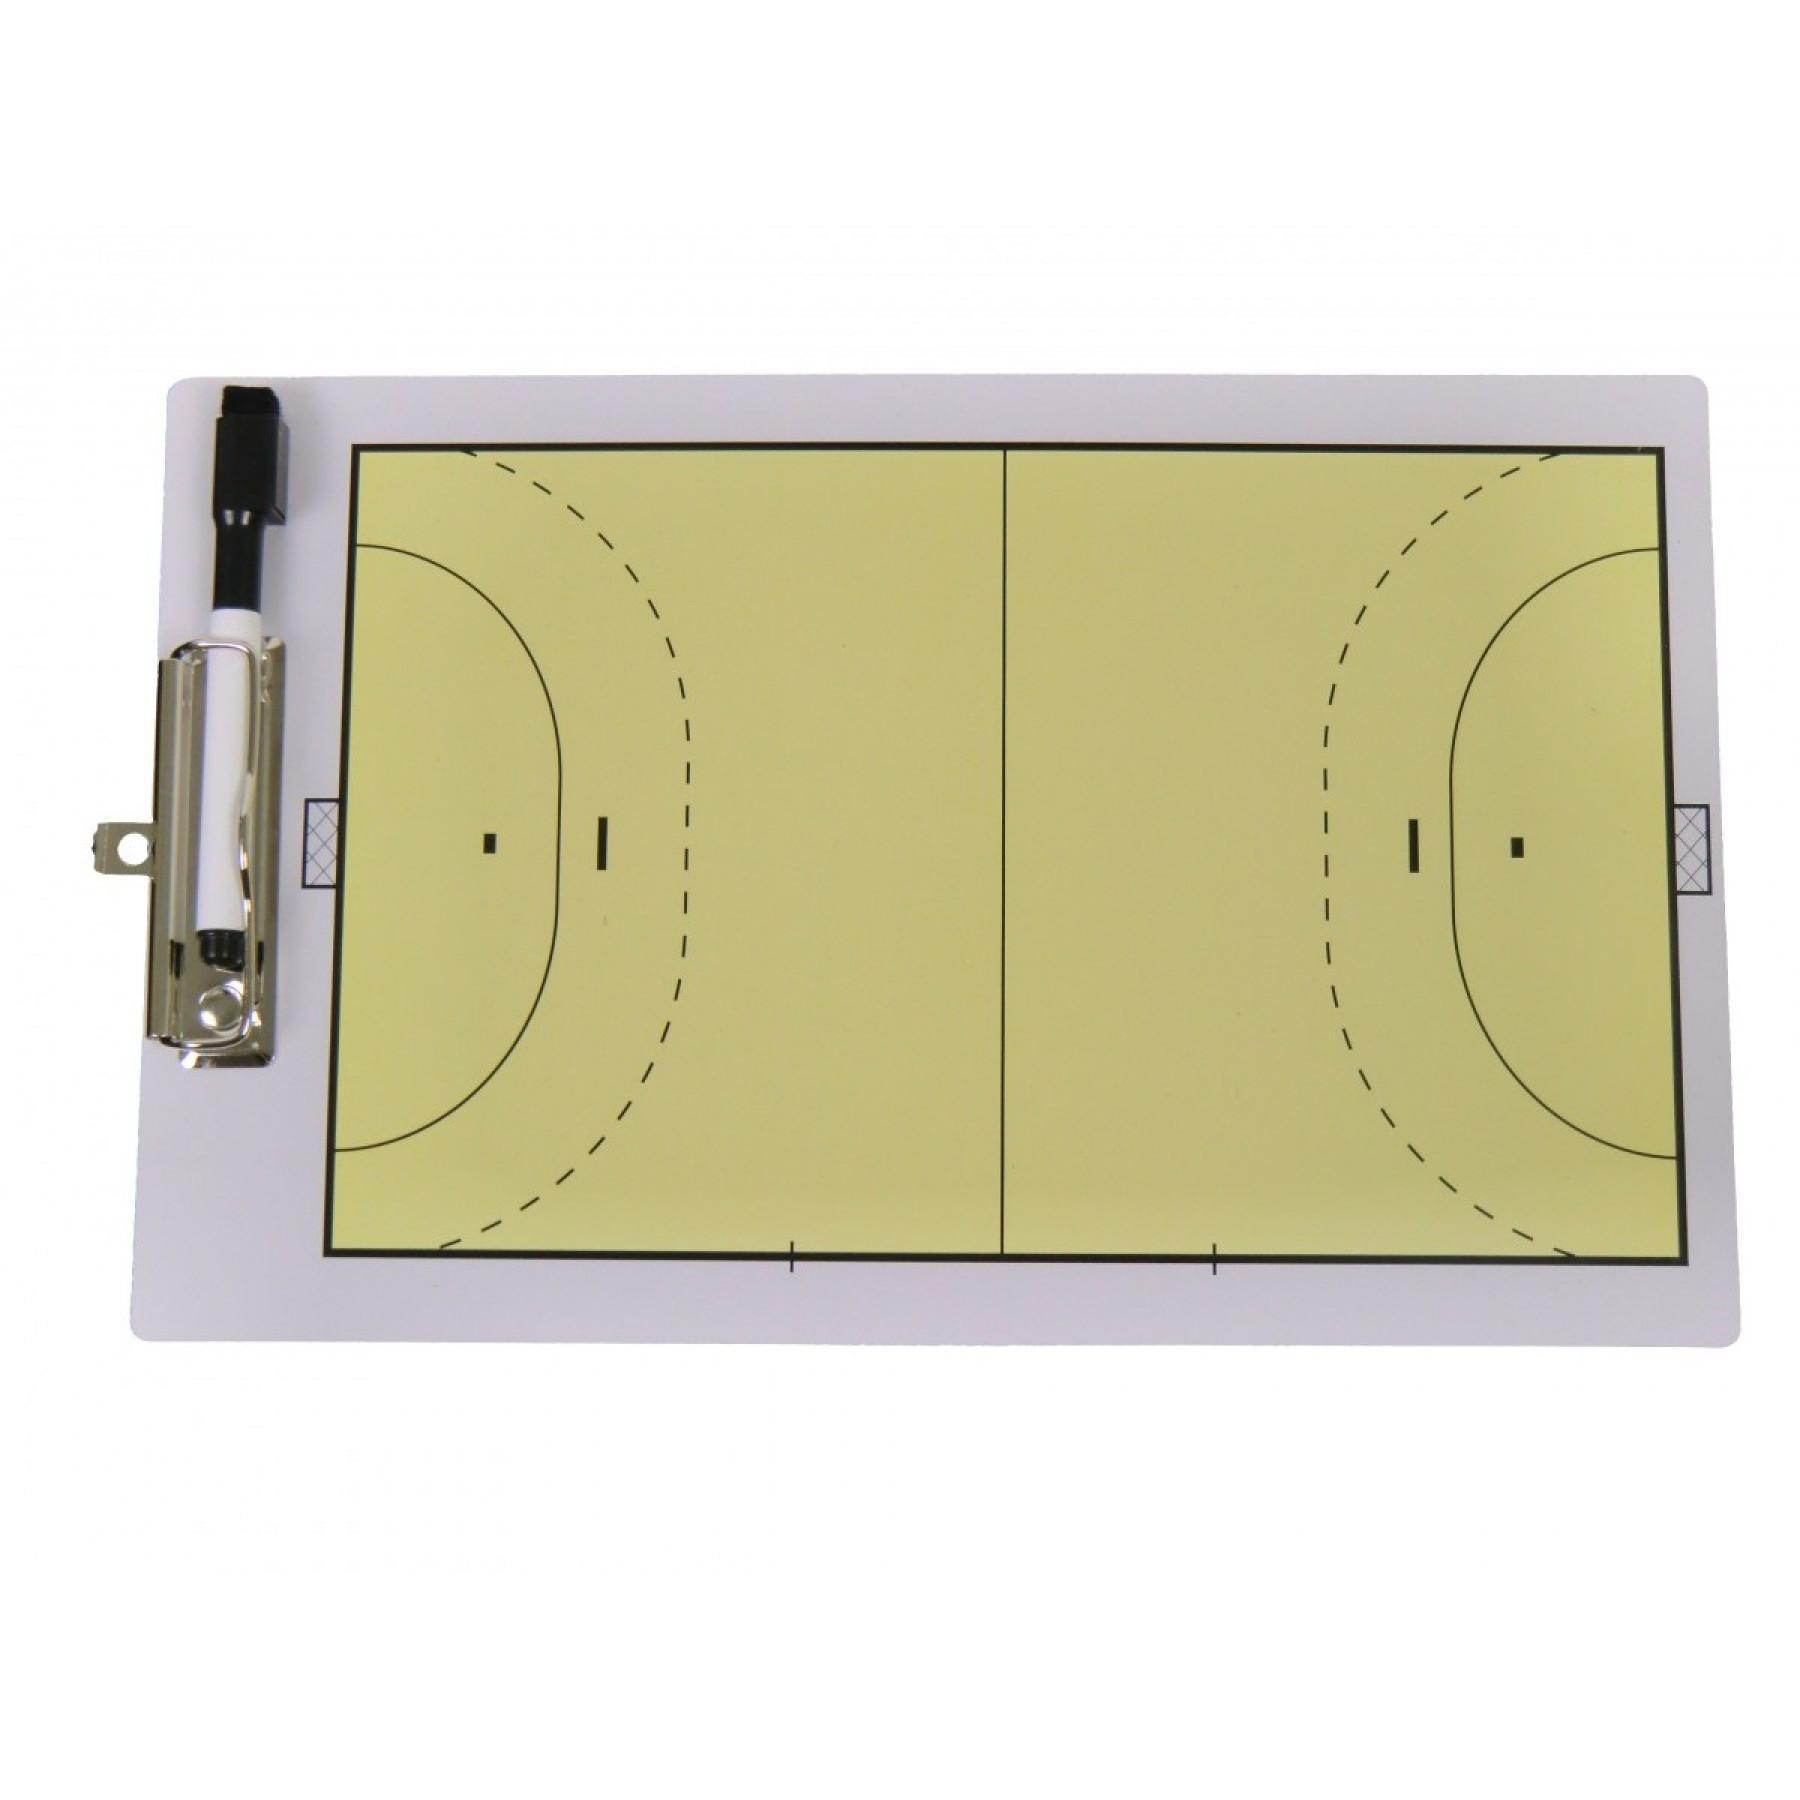 Handball two-sided tactical notebook